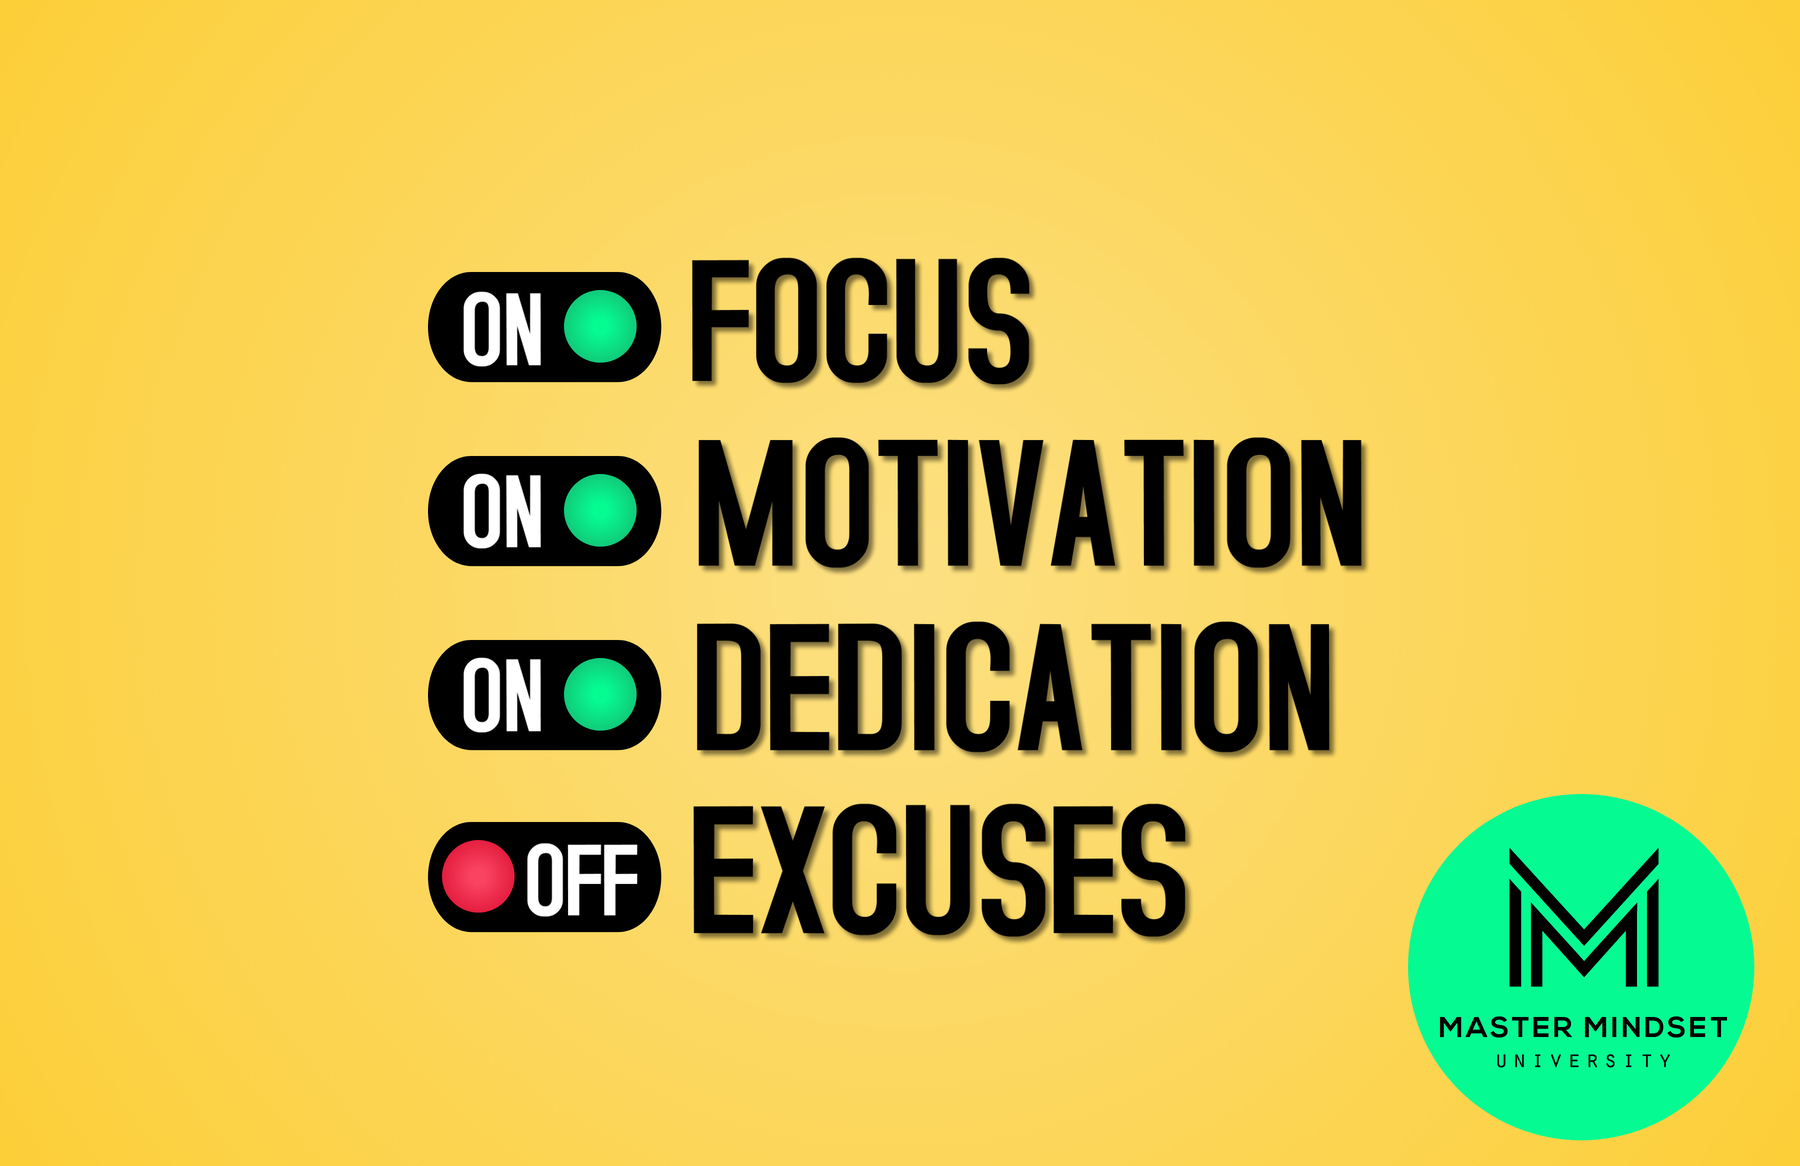 You are currently viewing ON FOCUS ON MOTIVATION ON DEDICATION OFF EXCUSES